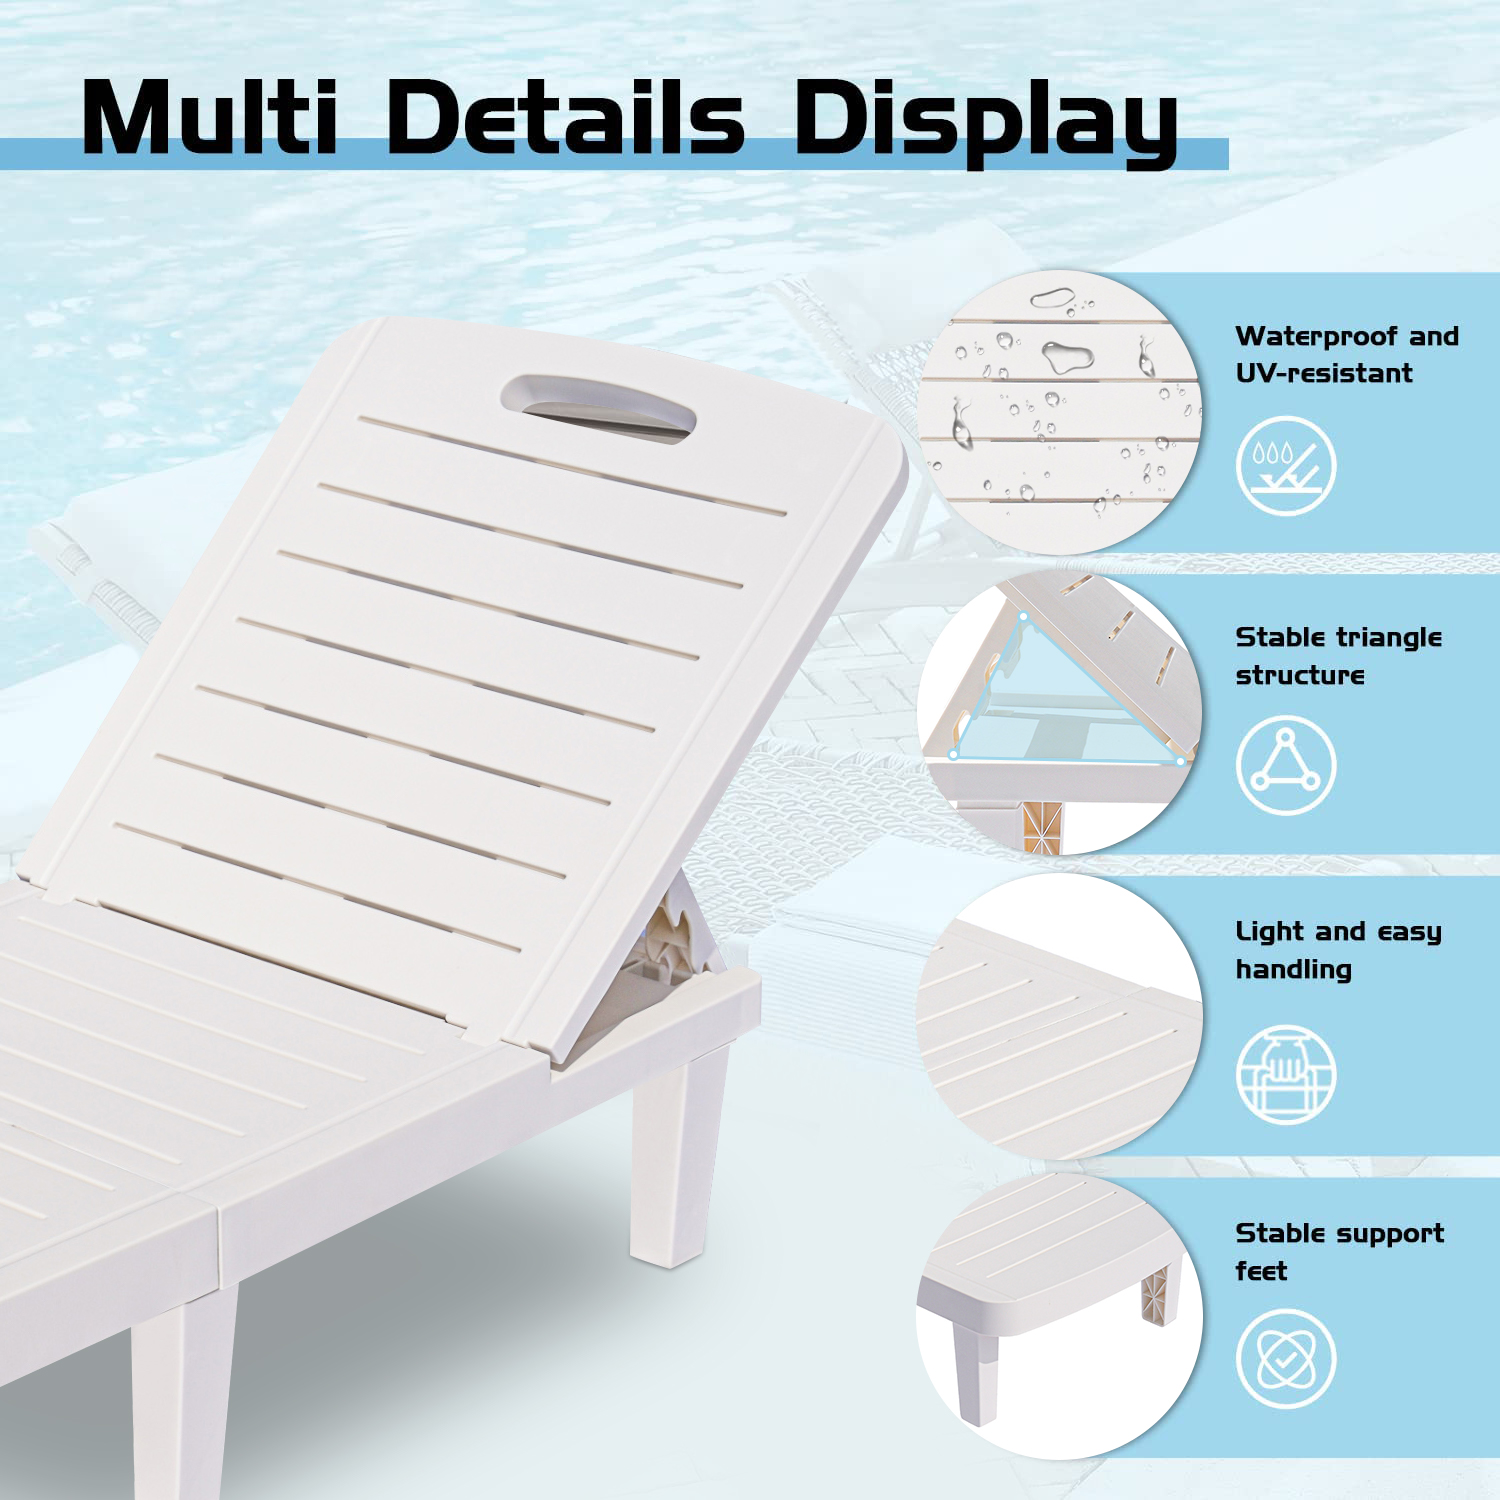 Chaise Lounge for Beach, Single Patio Furniture Set with Retractable Tray, Outdoor Chaise Lounge Chair with Adjustable Back, All-Weather Plastic Reclining Lounge Chair for Backyard, Garden, Pool, L454 - image 5 of 9